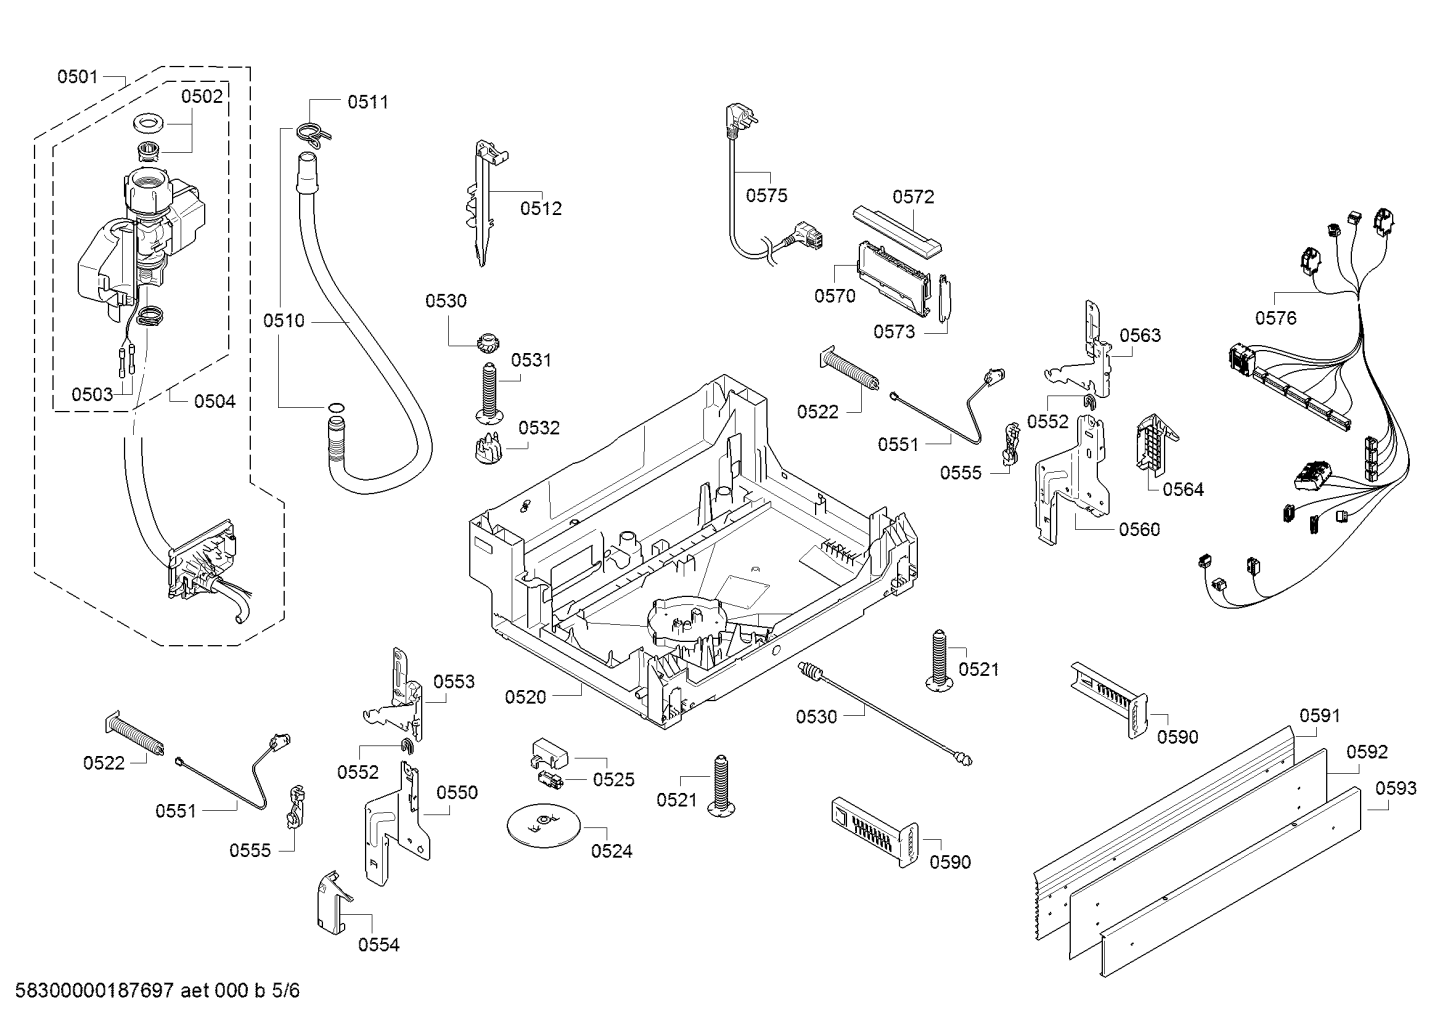 drawing_link_5_device_1768026